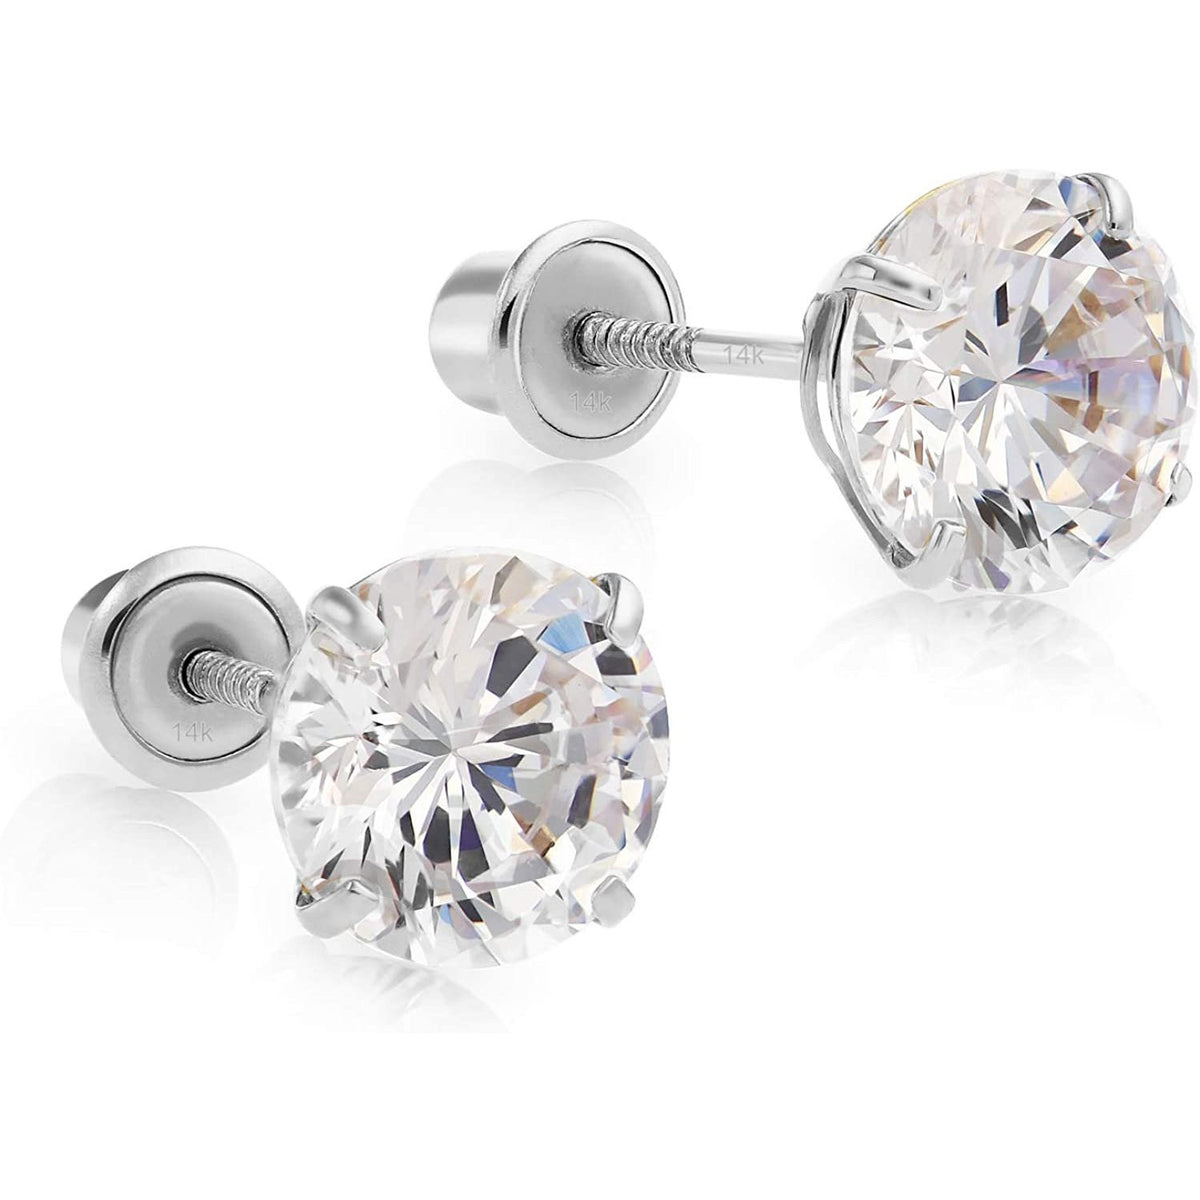 14k White Gold Made with SWAROVSKI Cubic Zirconia Solitaire Stud Earrings  with Secure Screw-backs